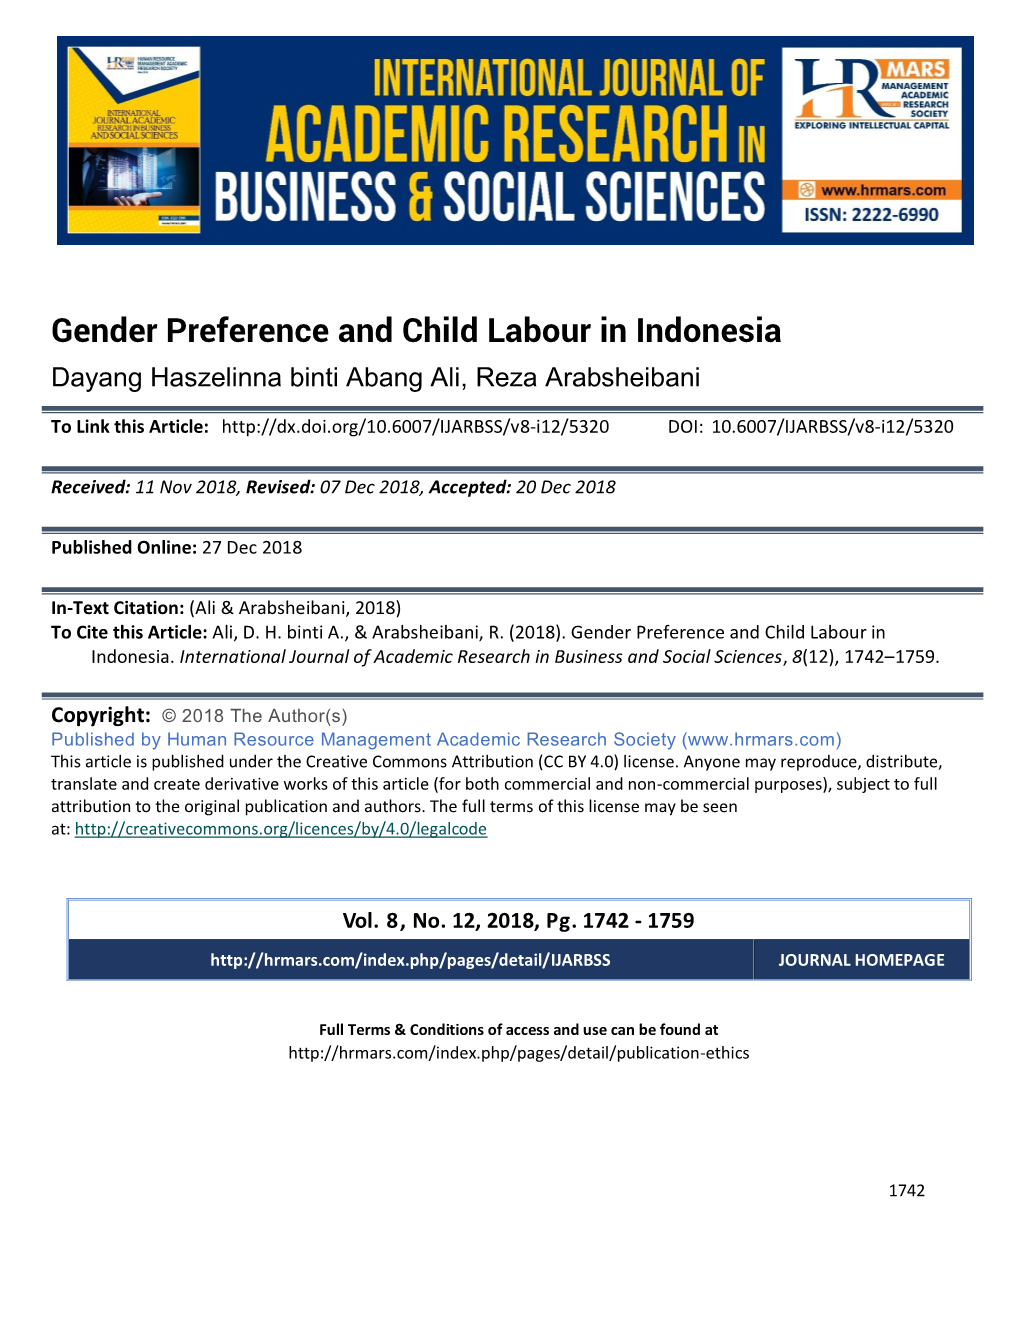 Gender Preference and Child Labour in Indonesia